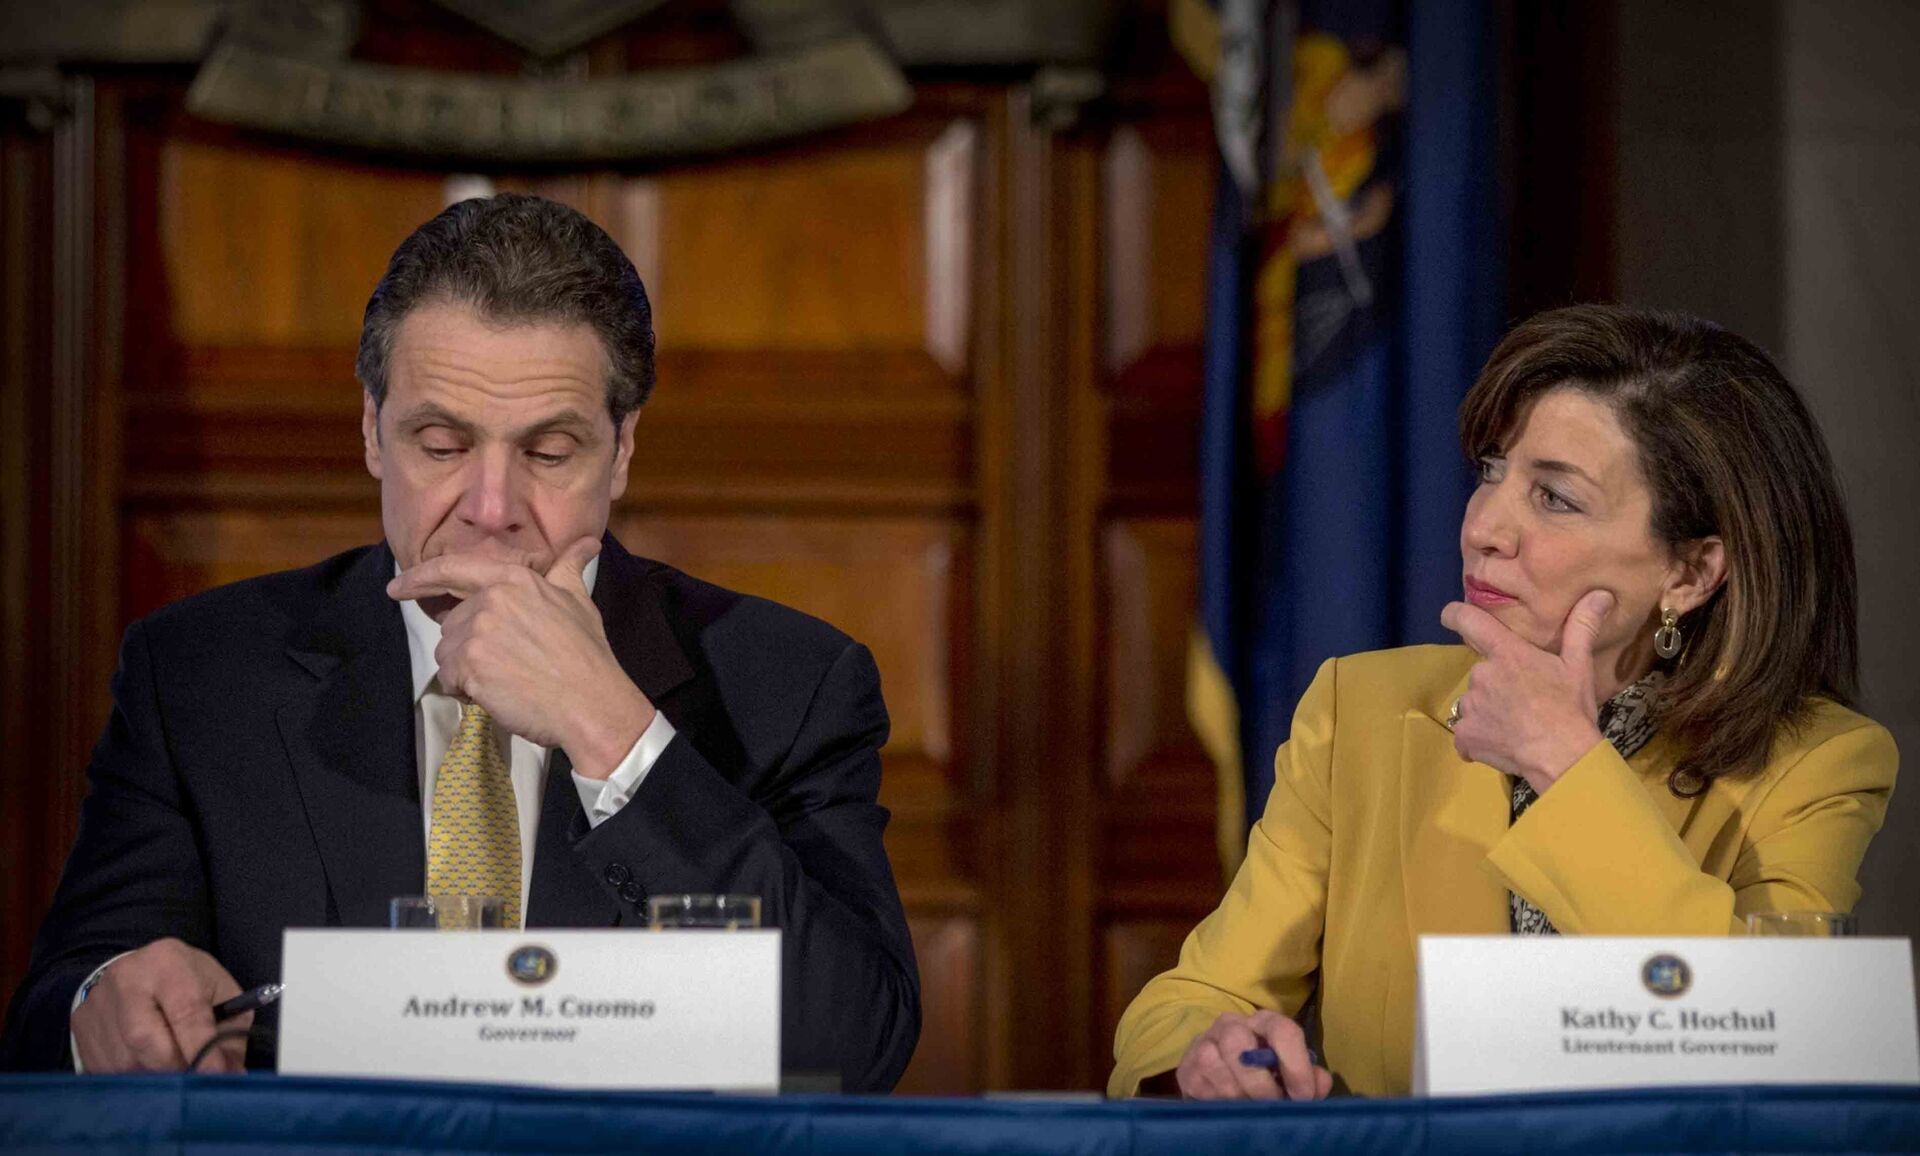 FILE - This photo from Wednesday, Feb. 25, 2015, shows New York Gov. Andrew Cuomo, left, and Lt. Gov. Kathy Hochul during a cabinet meeting at the Capitol in Albany, N.Y. Cuomo faces possible impeachment following findings from an independent investigation overseen by state Attorney General Letitia James - Sputnik International, 1920, 07.09.2021